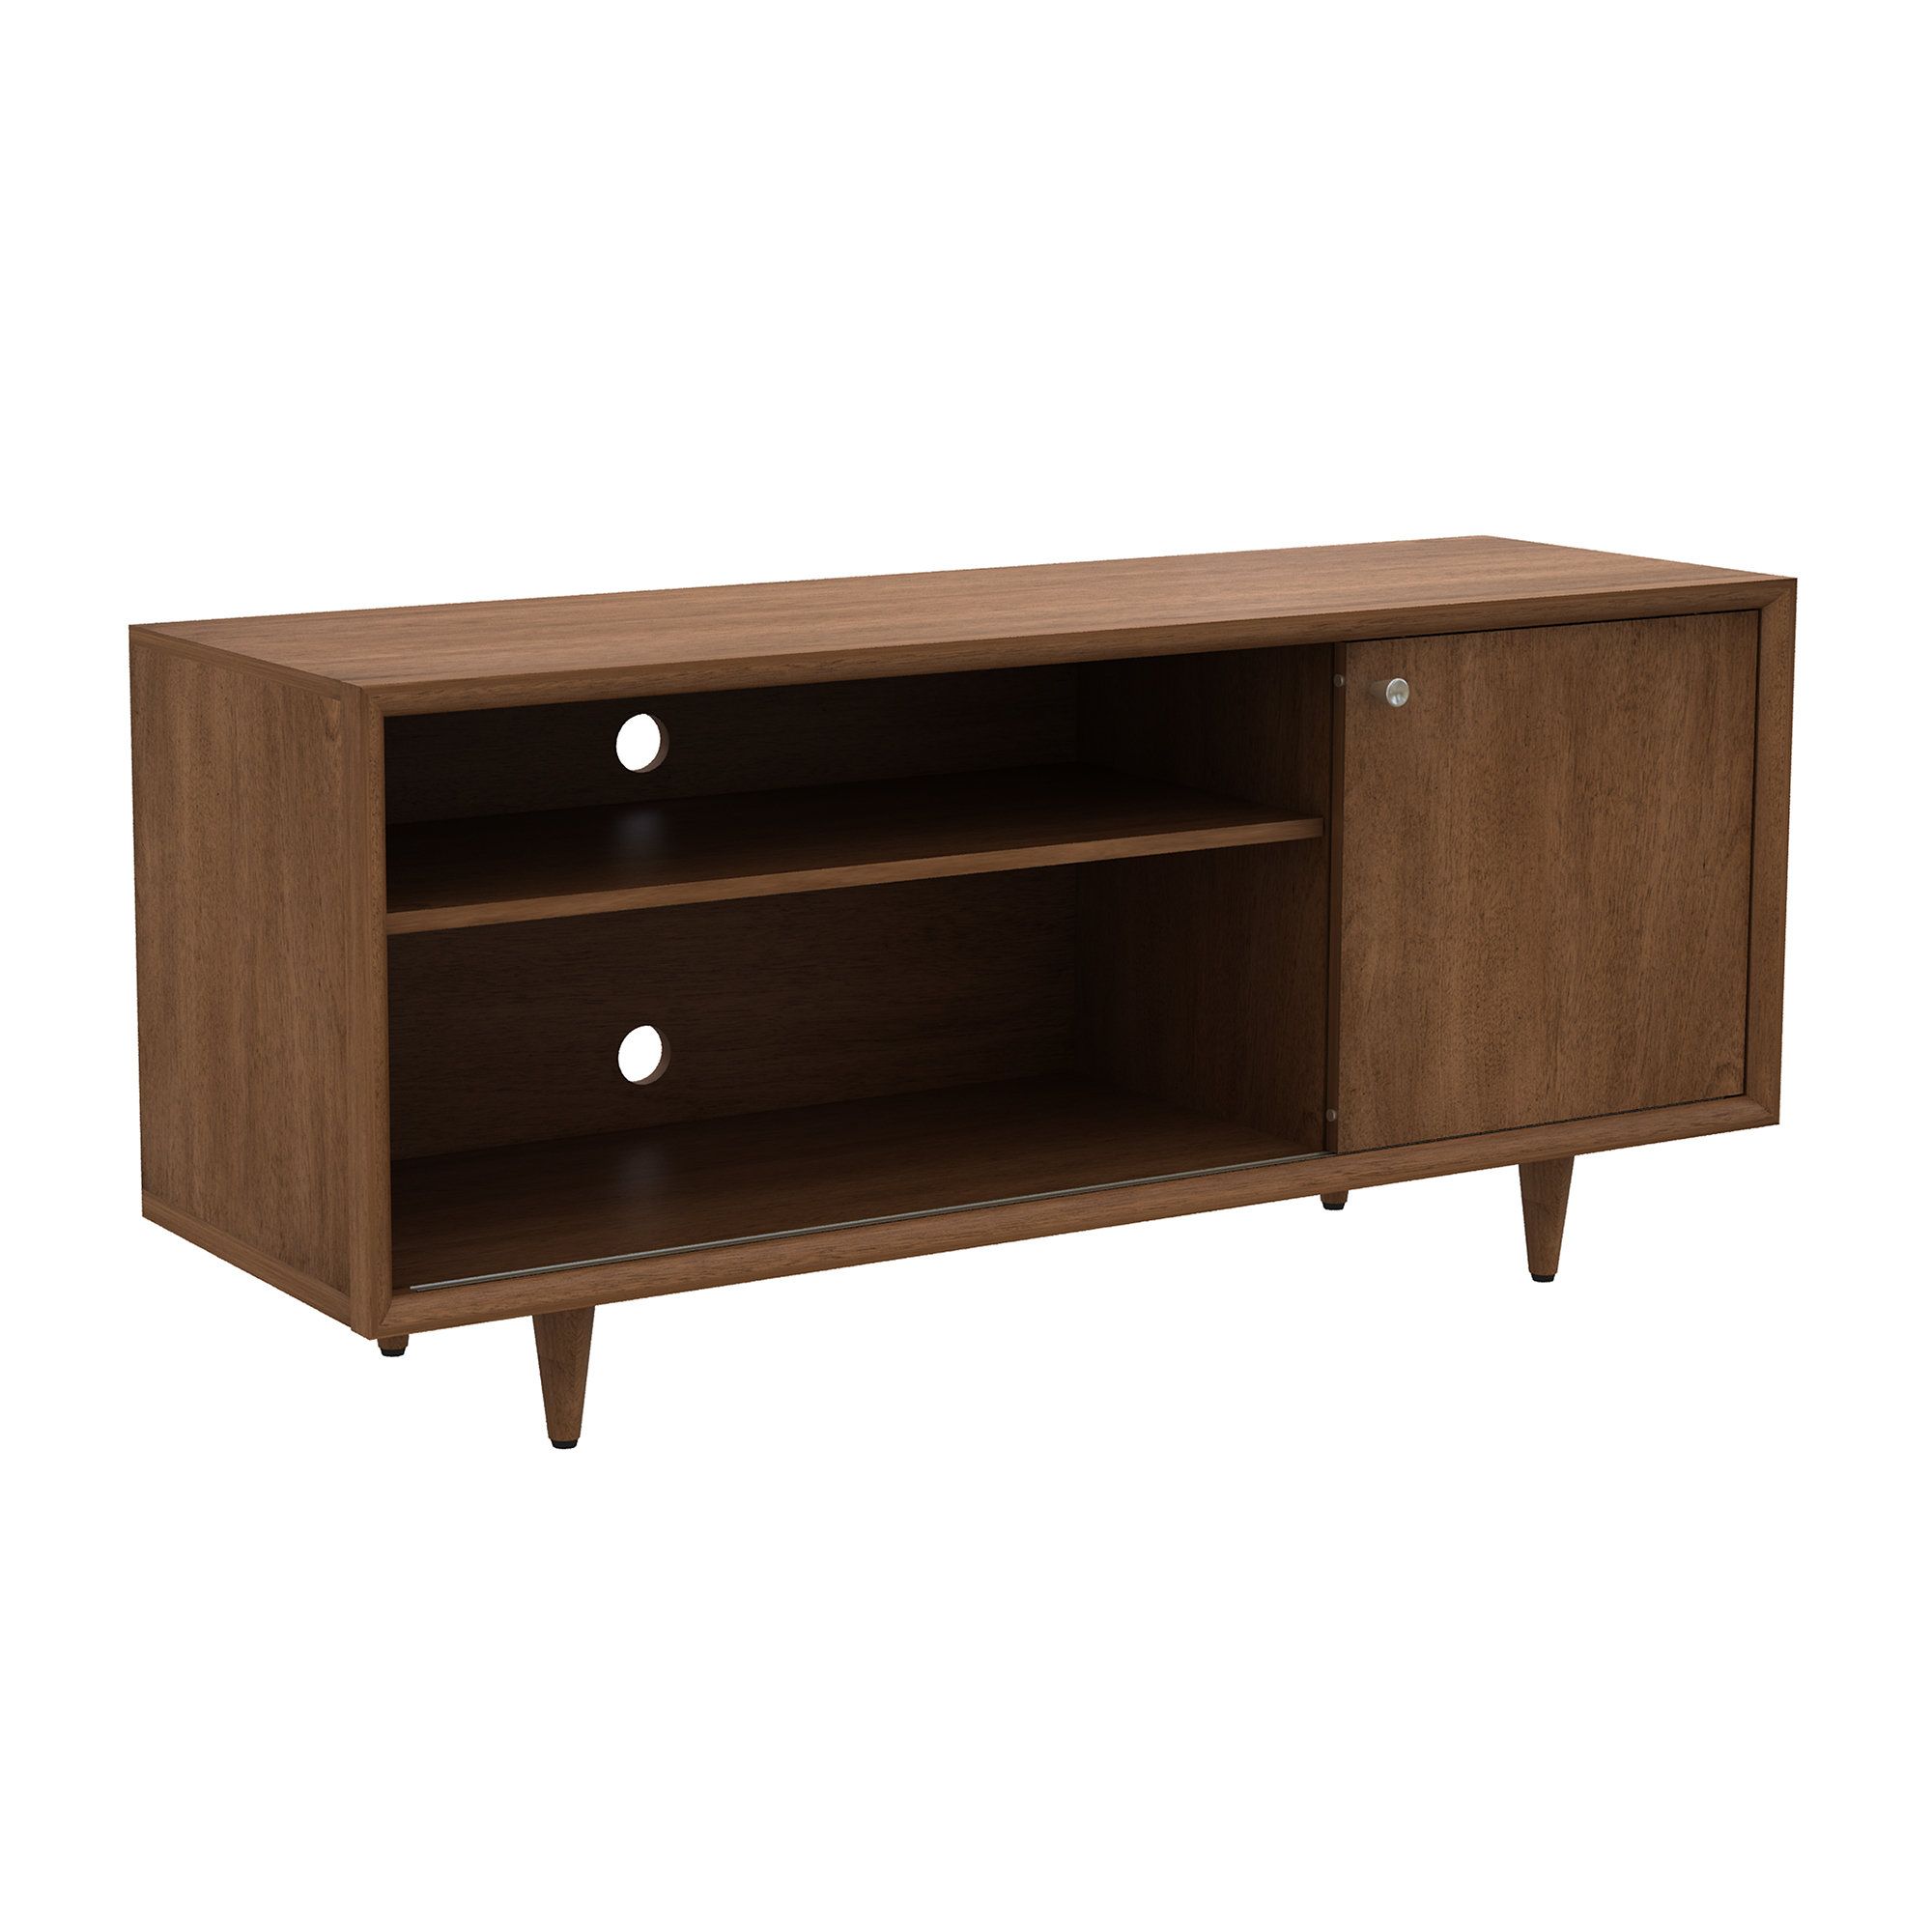 Laurent 70 Inch Tv Stands Intended For Trendy Modern Langley Street Tv Stands (View 17 of 20)